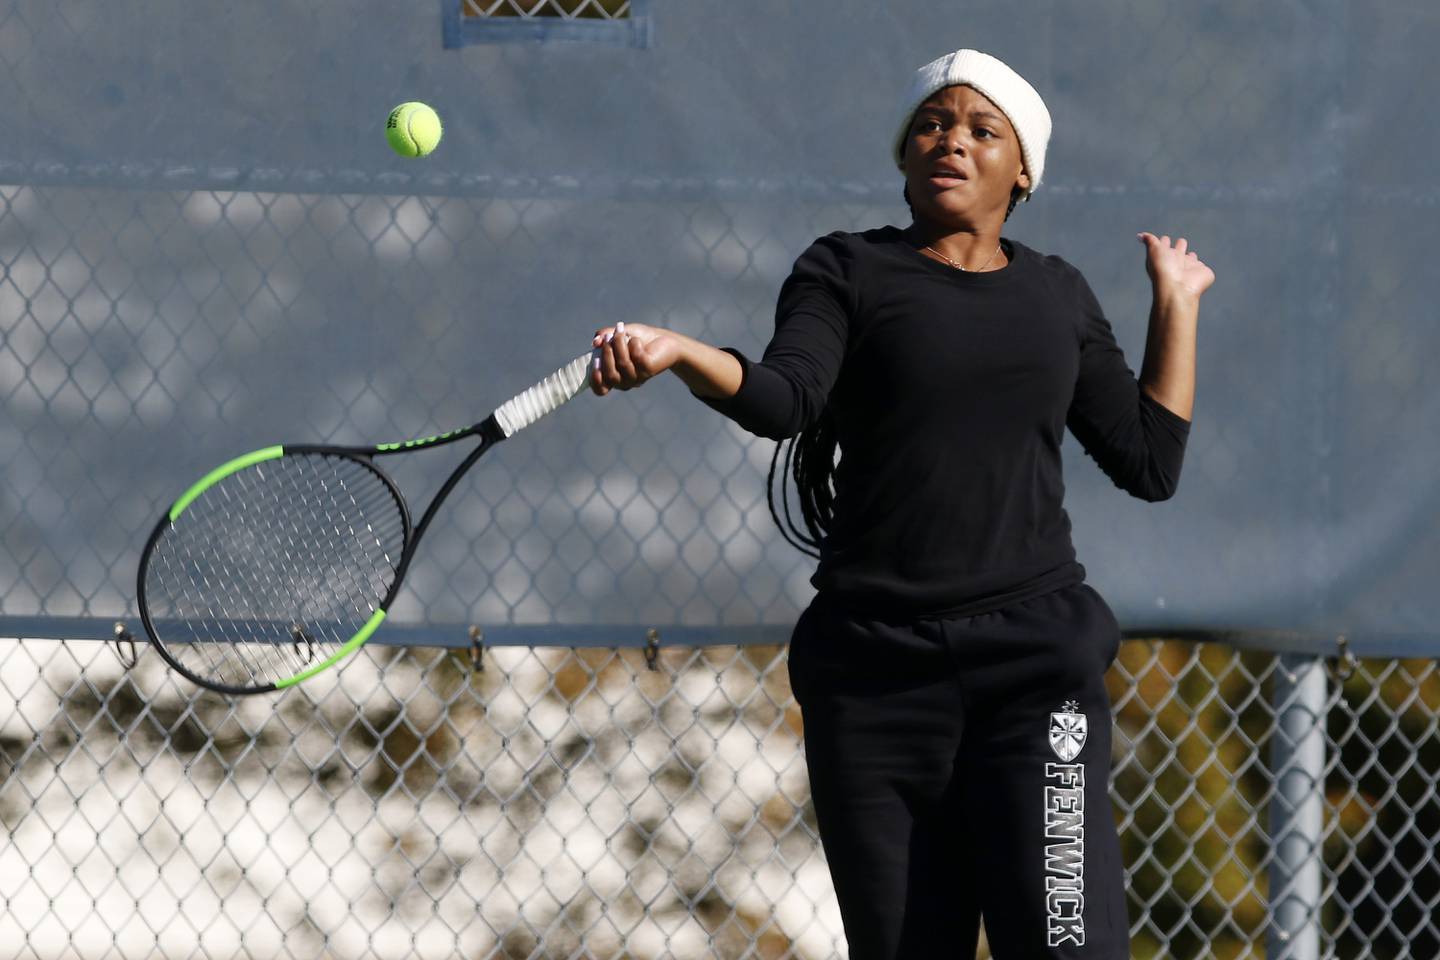 Fenwick's Trinity Akrdin hits the ball in her match with teammate Megan Trifilio against Teutopolis during the girls state tennis 1A doubles tournament at Buffalo Grove High School on Saturday, Oct. 23, 2021 in Buffalo Grove.